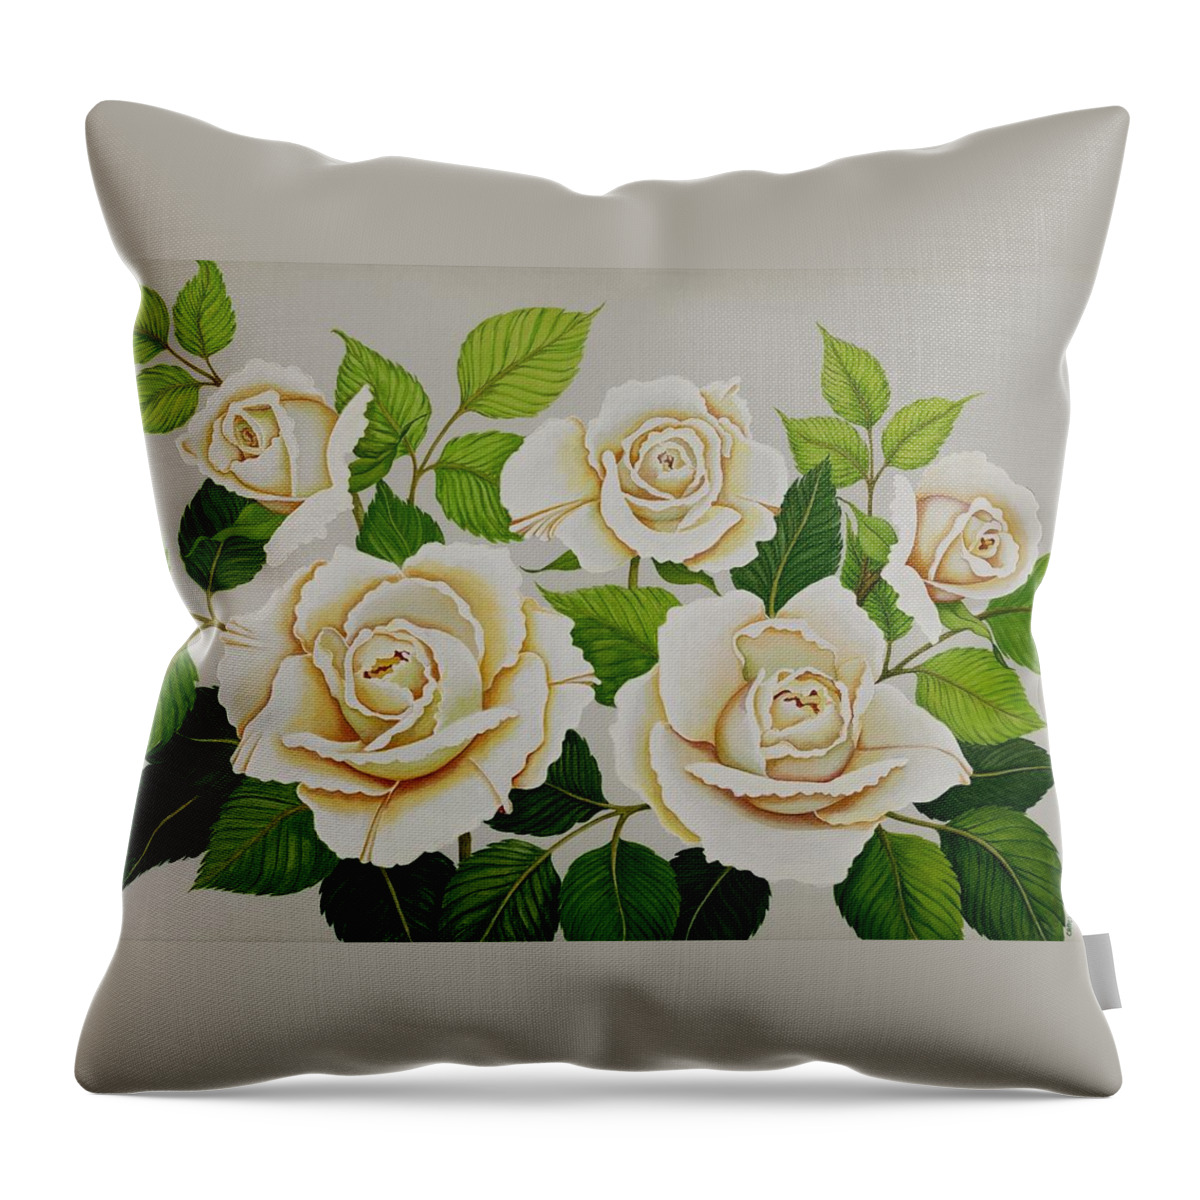 Rose Throw Pillow featuring the painting White Roses by Carol Sabo